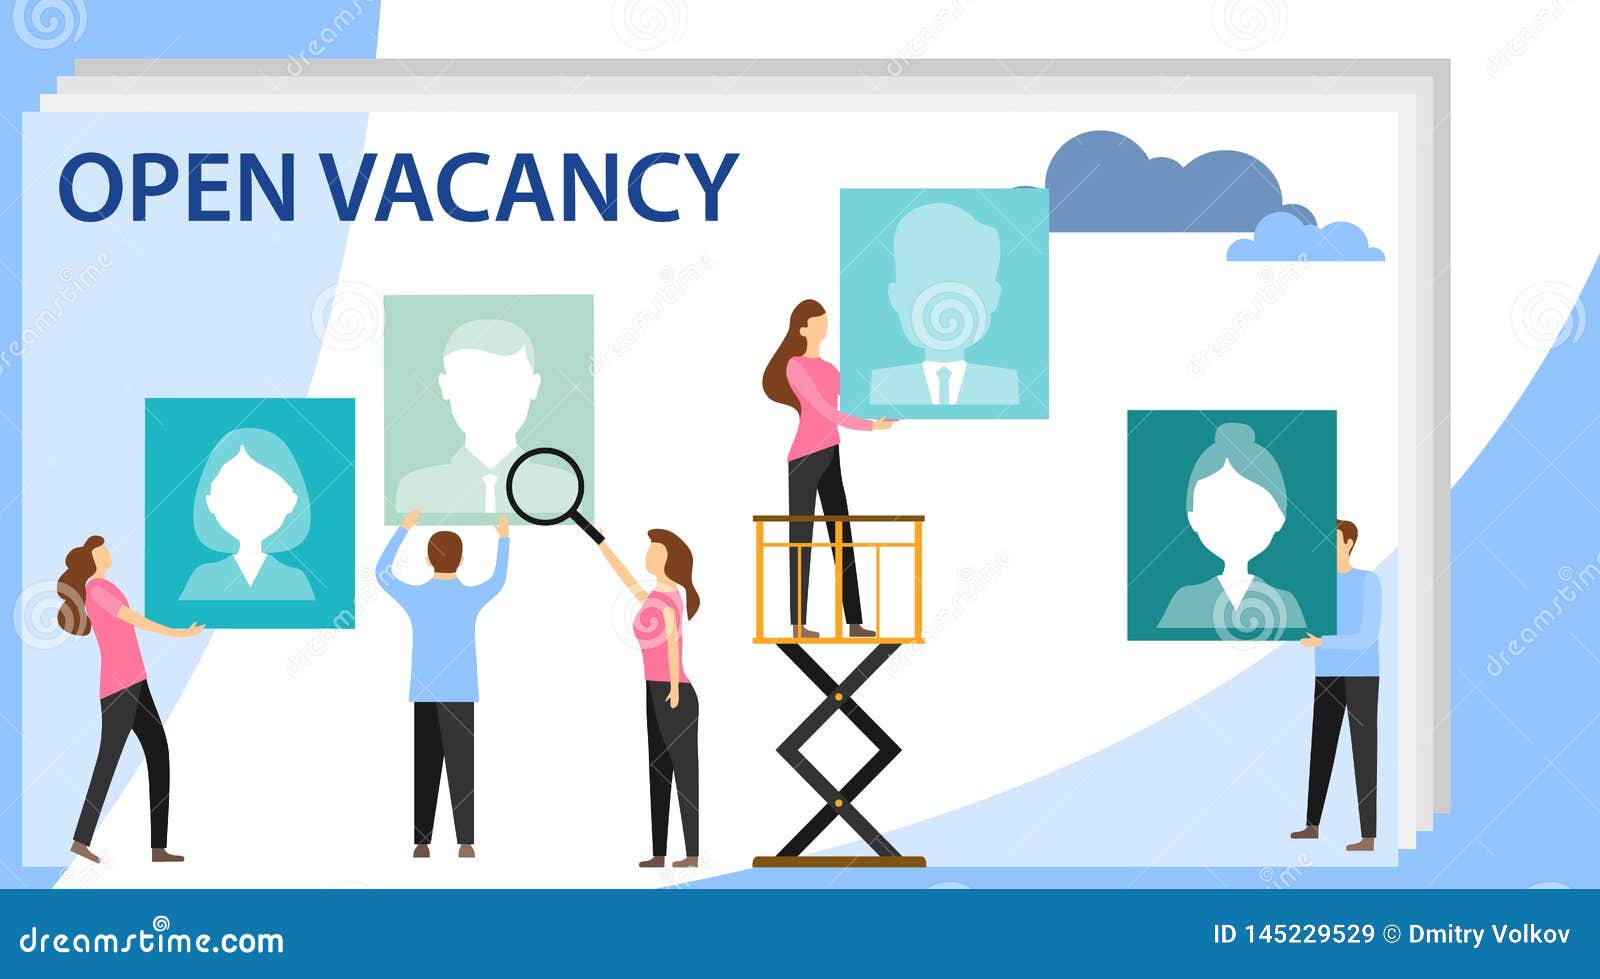 Outbound Sales Specialist - Instagram Outreach Job Skyray Ventures Islamabad